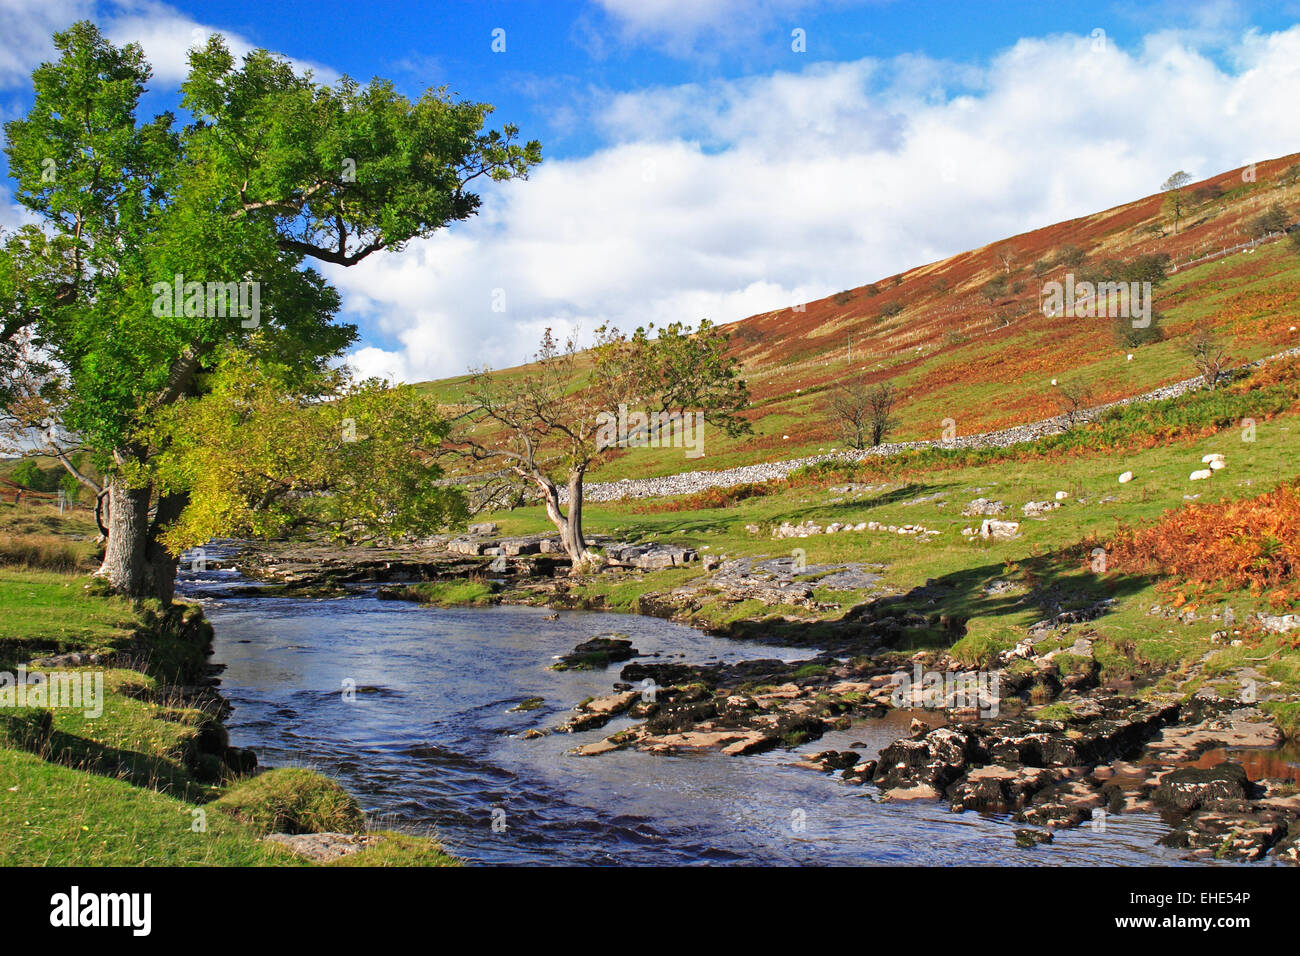 The infant River Wharfe in Langstrothdale / Yorks Dales NP / Yorkshire / UK Stock Photo